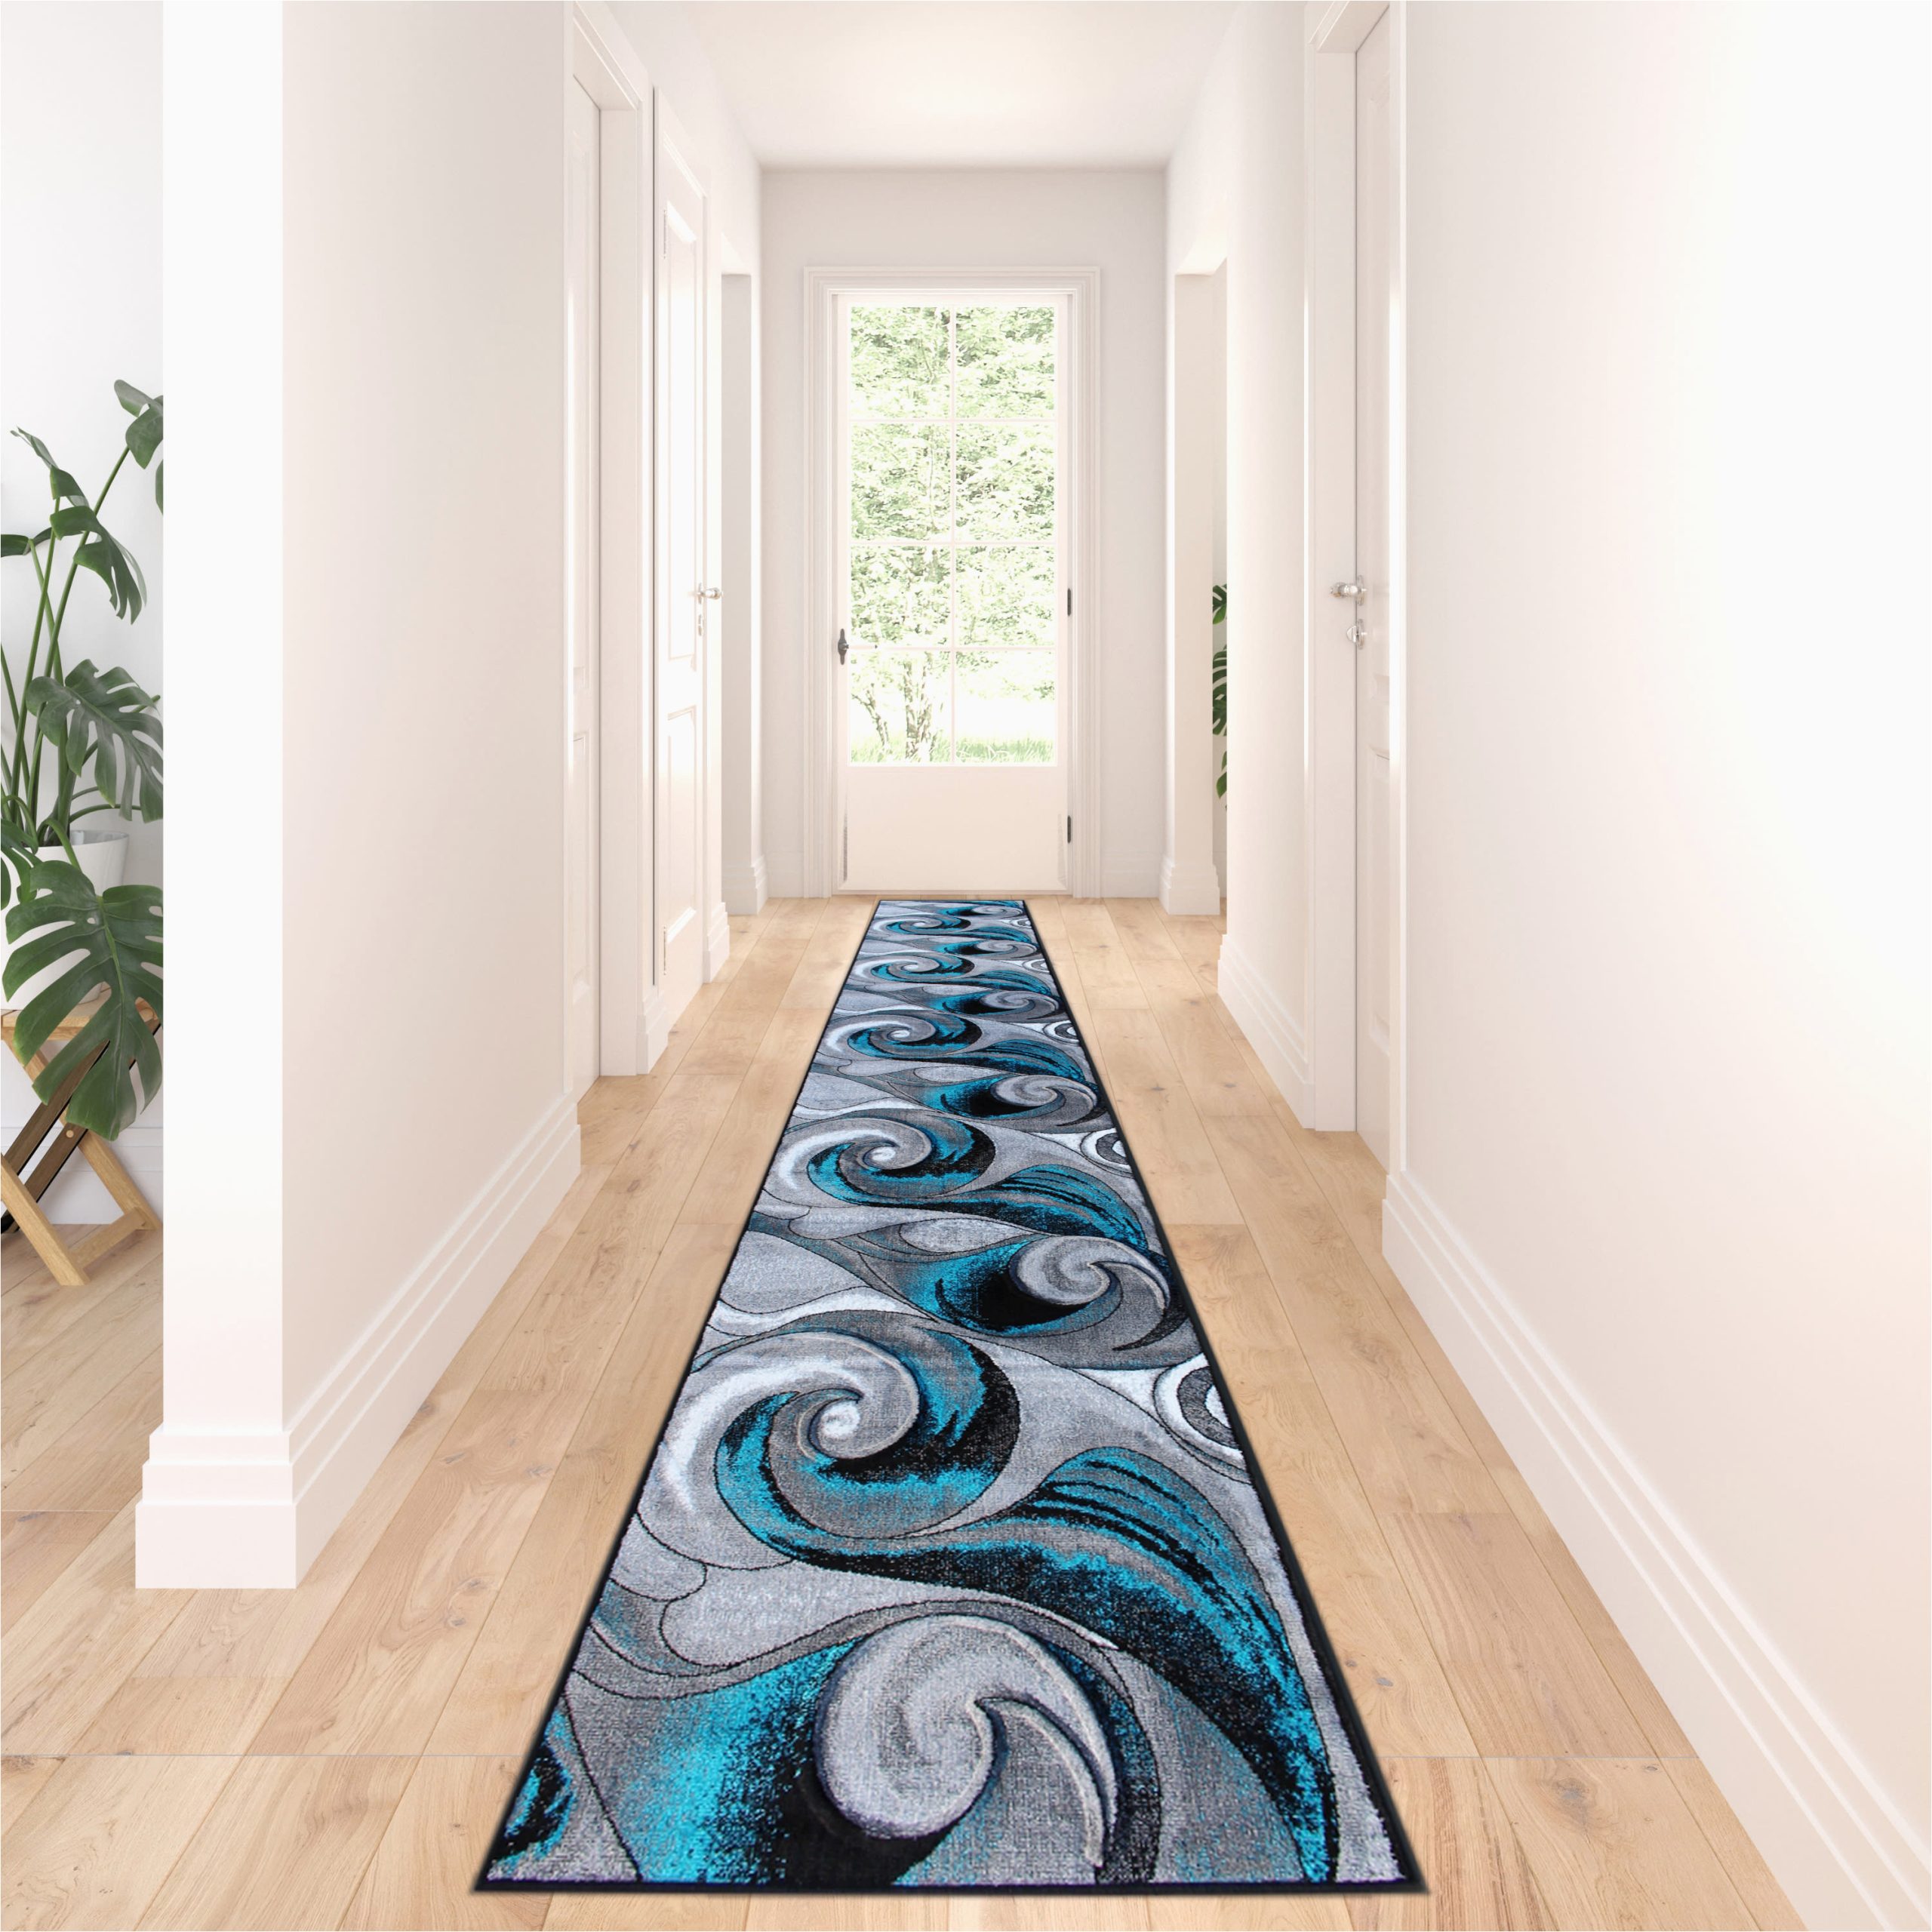 10 X 15 Foot area Rug Masada Rugs Modern Woven Long Runner Turquoise area Rug, Hand Carved (32 Inch X 15 Feet 10 Inch) Runner